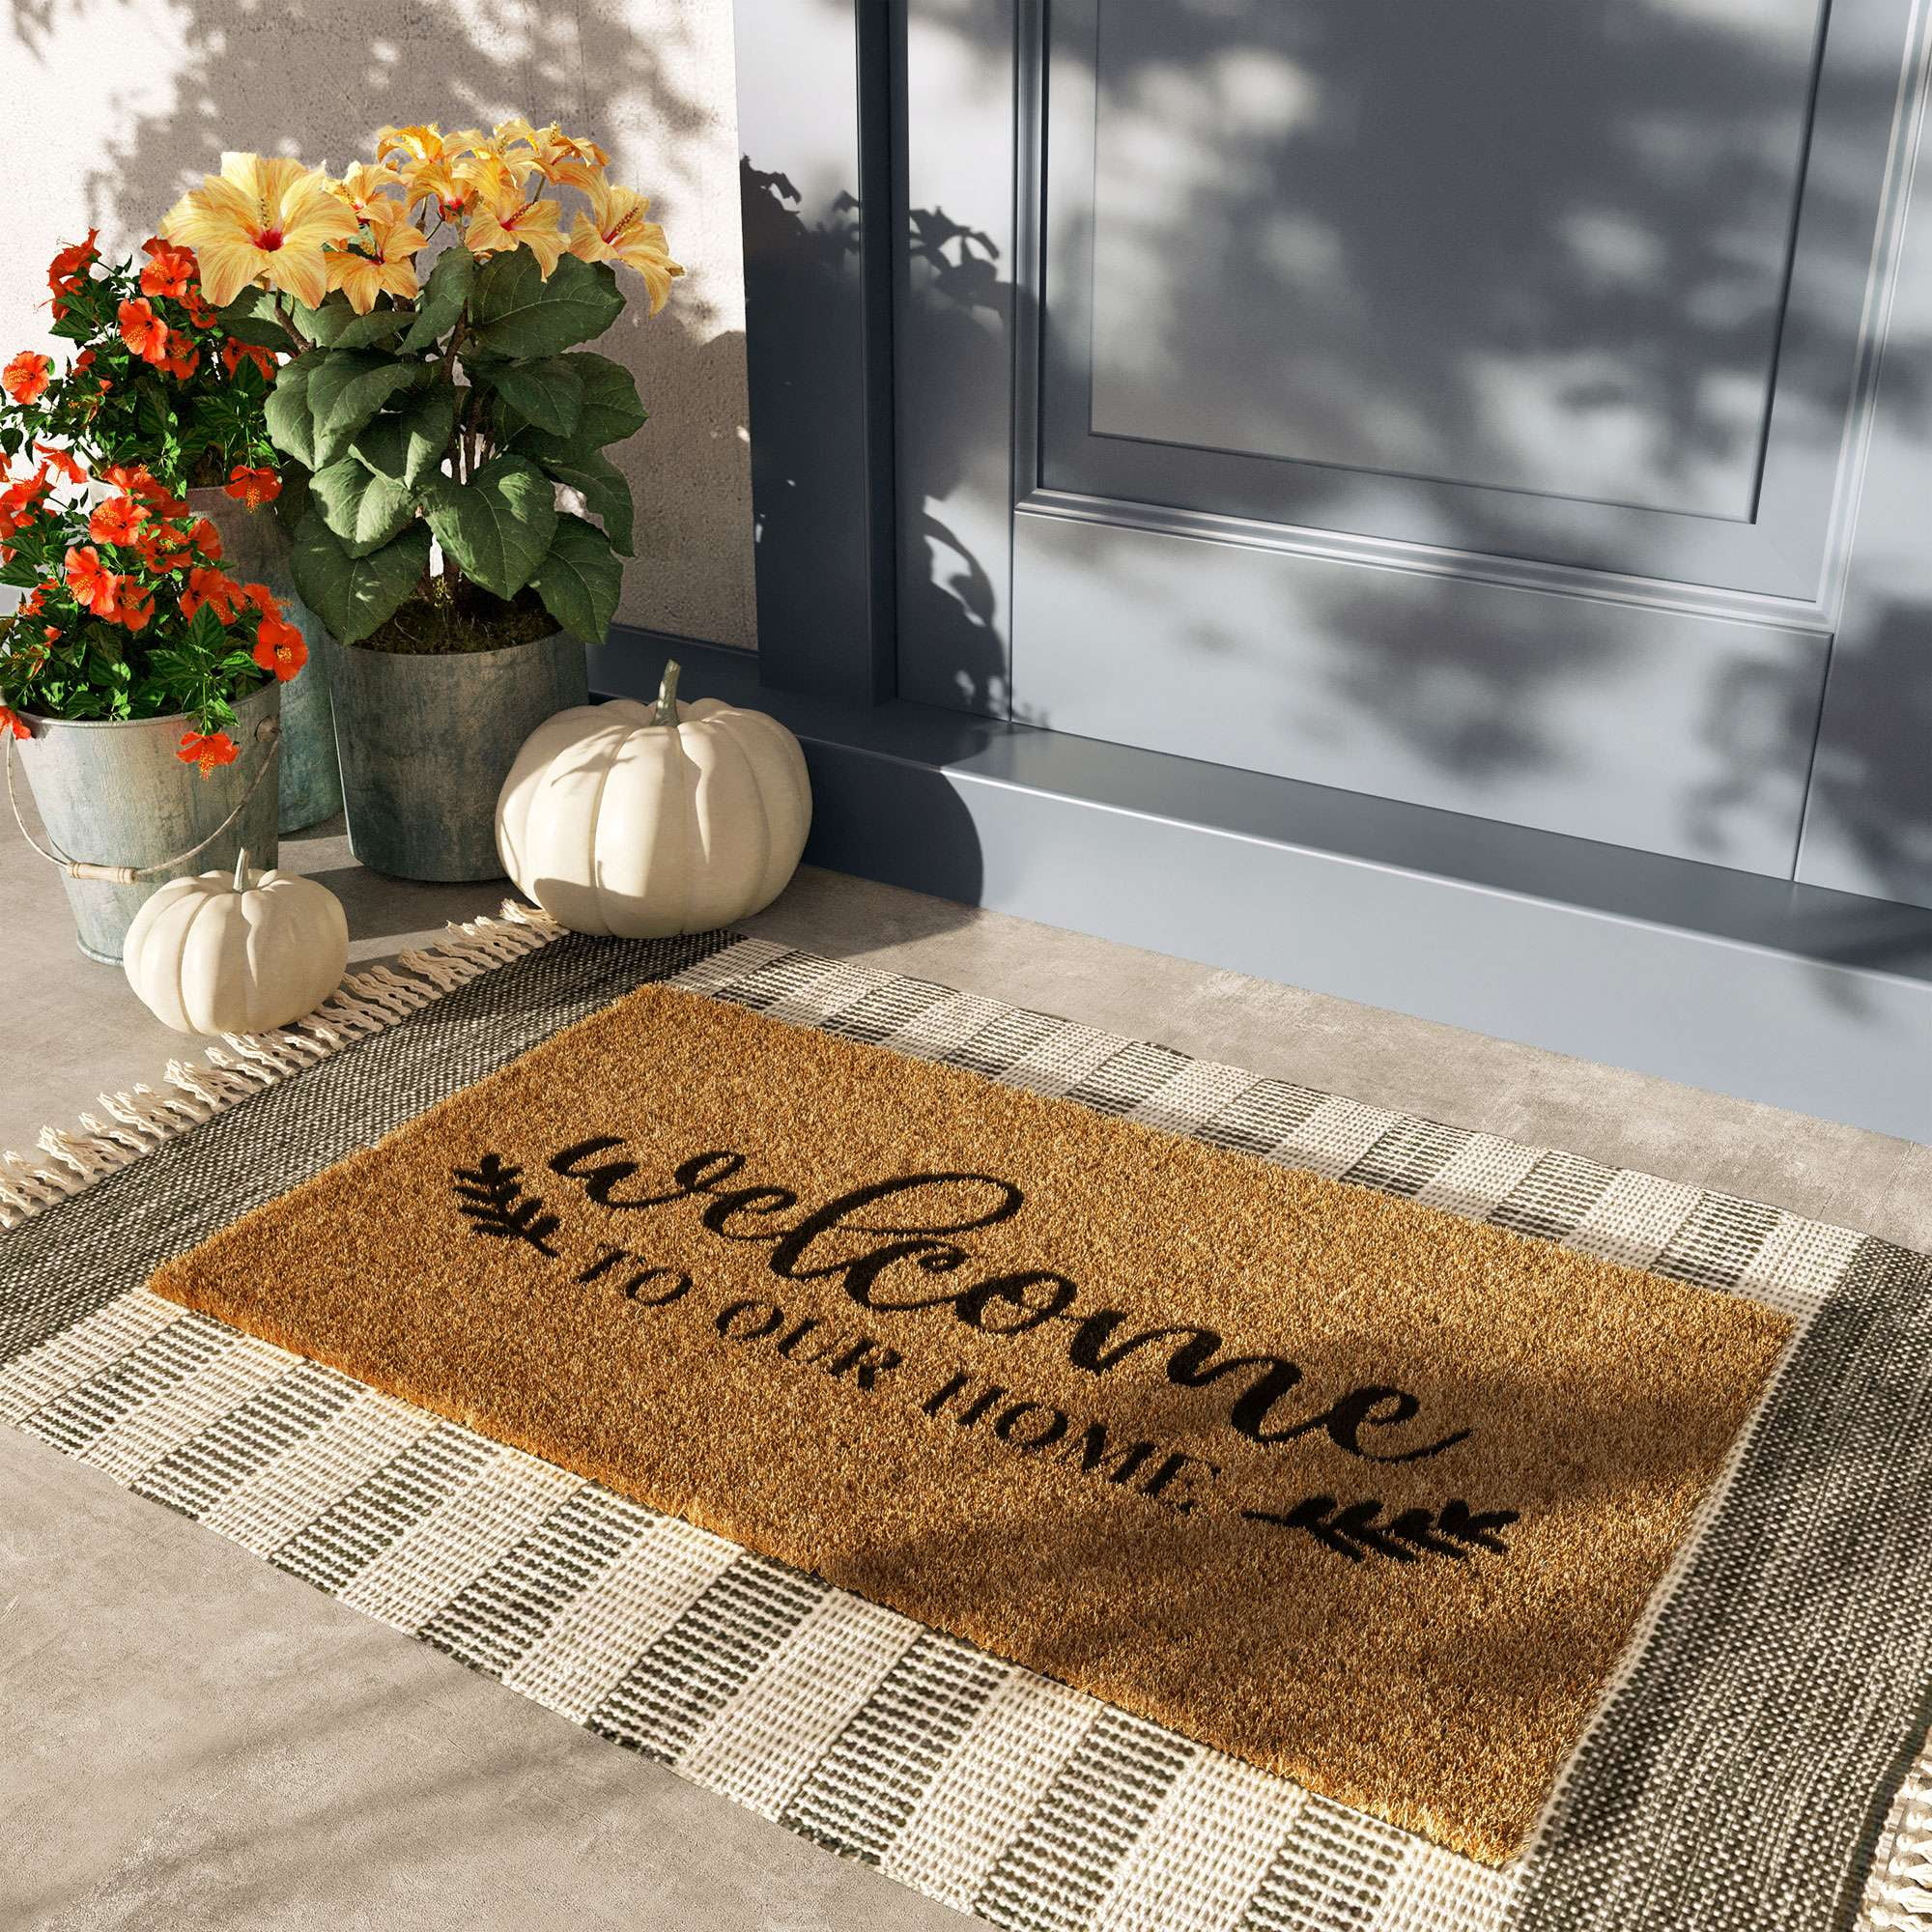  EARTHALL Funny Welcome Mats, Front Door Mat for Home Entrance,  Funny Doormat Outdoor/Indoor Entrance, Front Porch Decor for Farmhouse  48x32 : Patio, Lawn & Garden